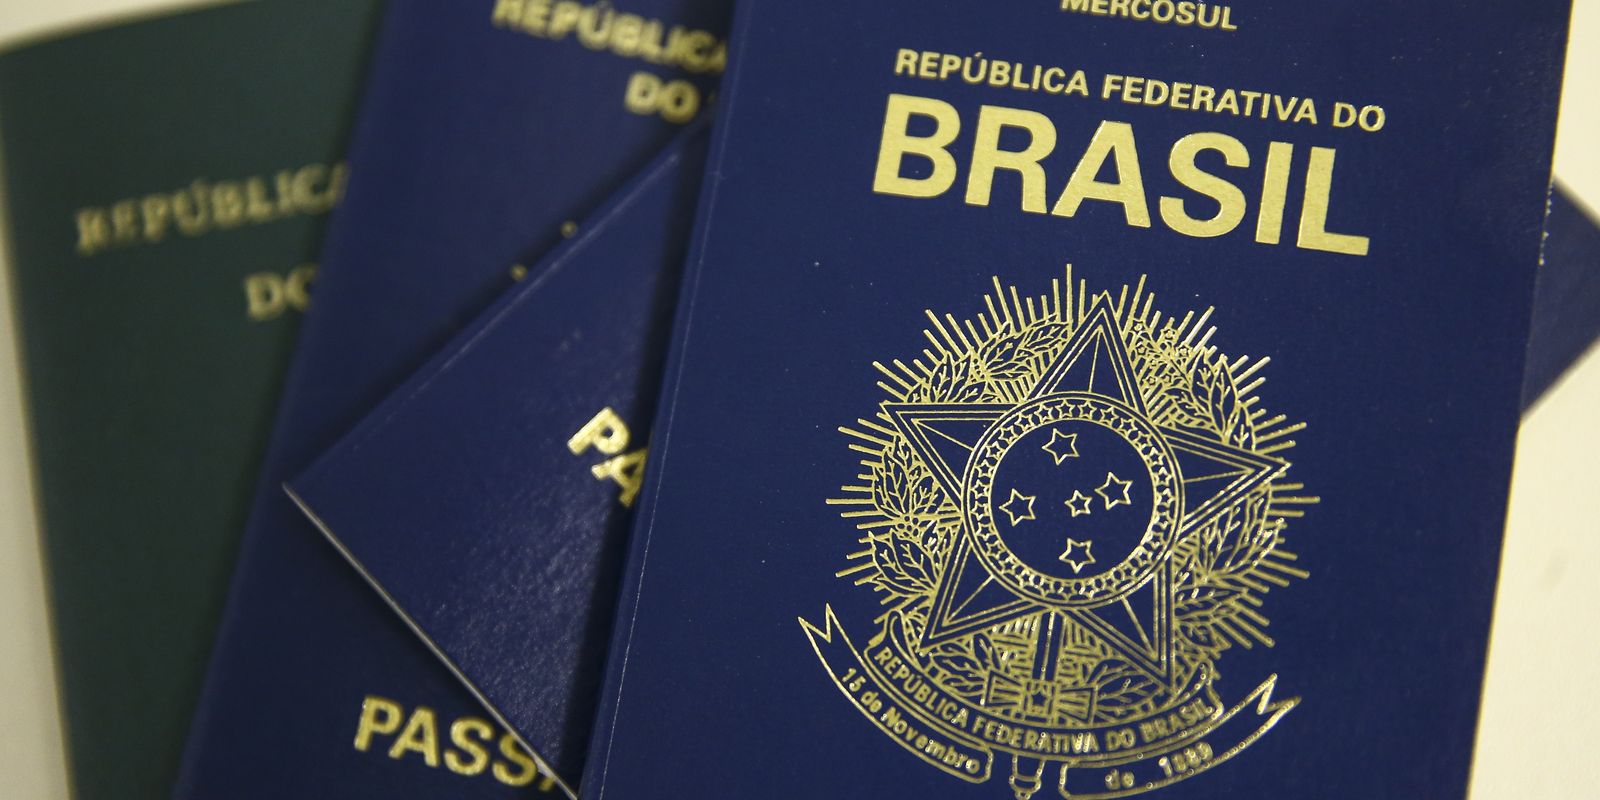 Brazilians wait nearly 20 months to obtain a visa to enter the United States.